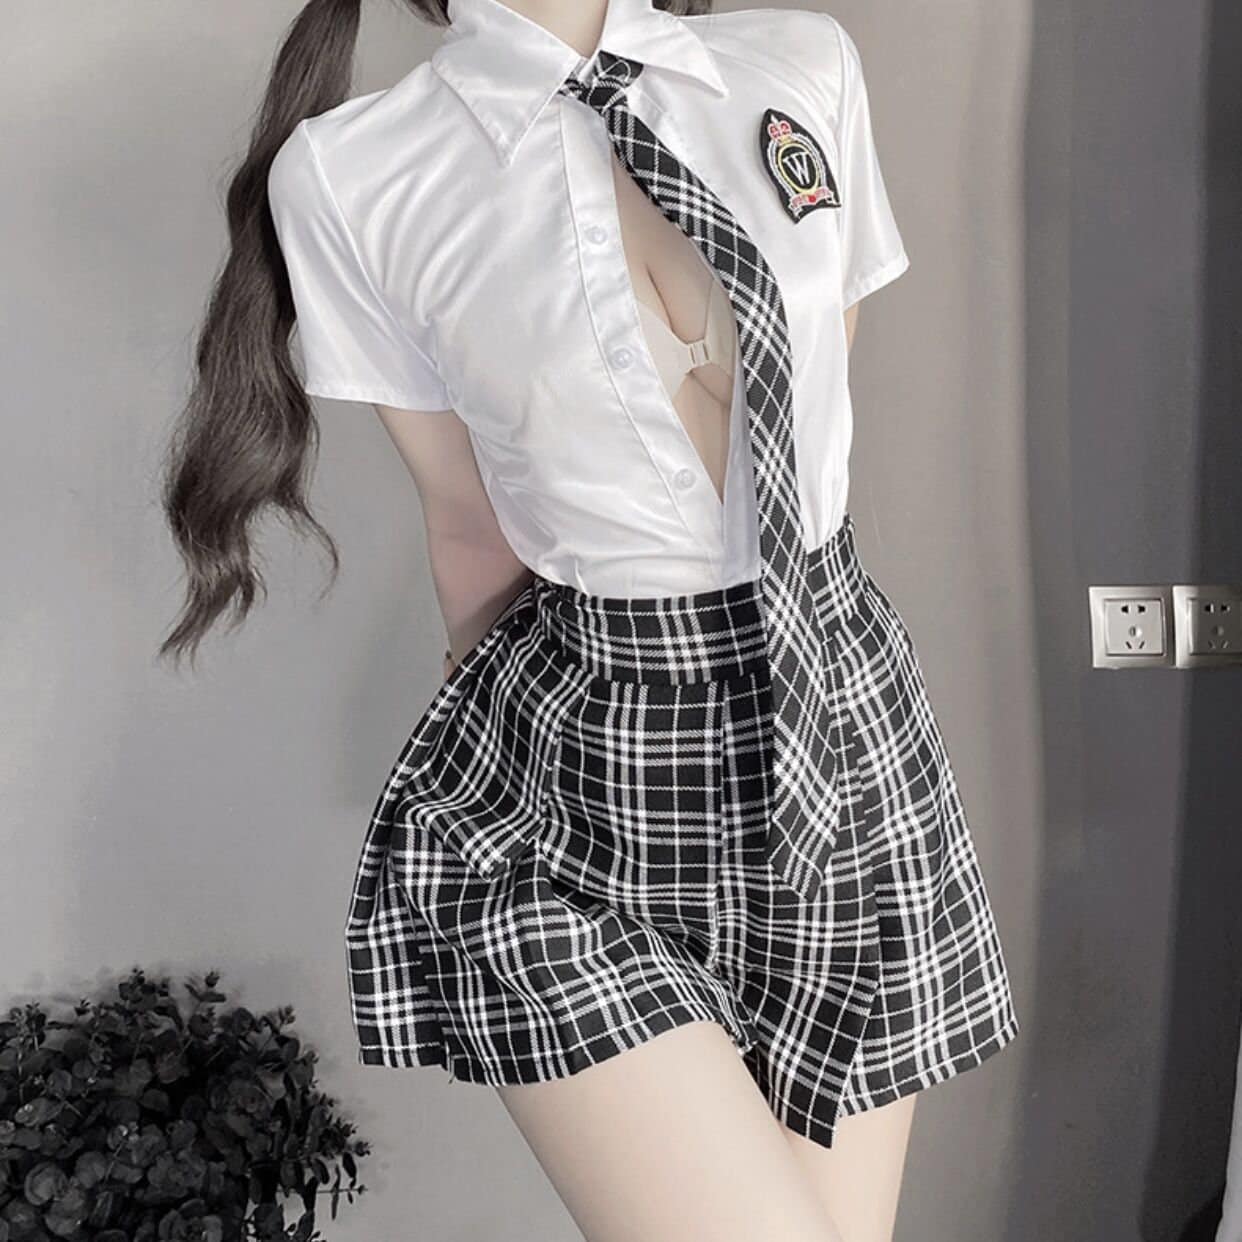 School Girl With Out Dress Video Live - Schoolgirl Costume - Etsy UK